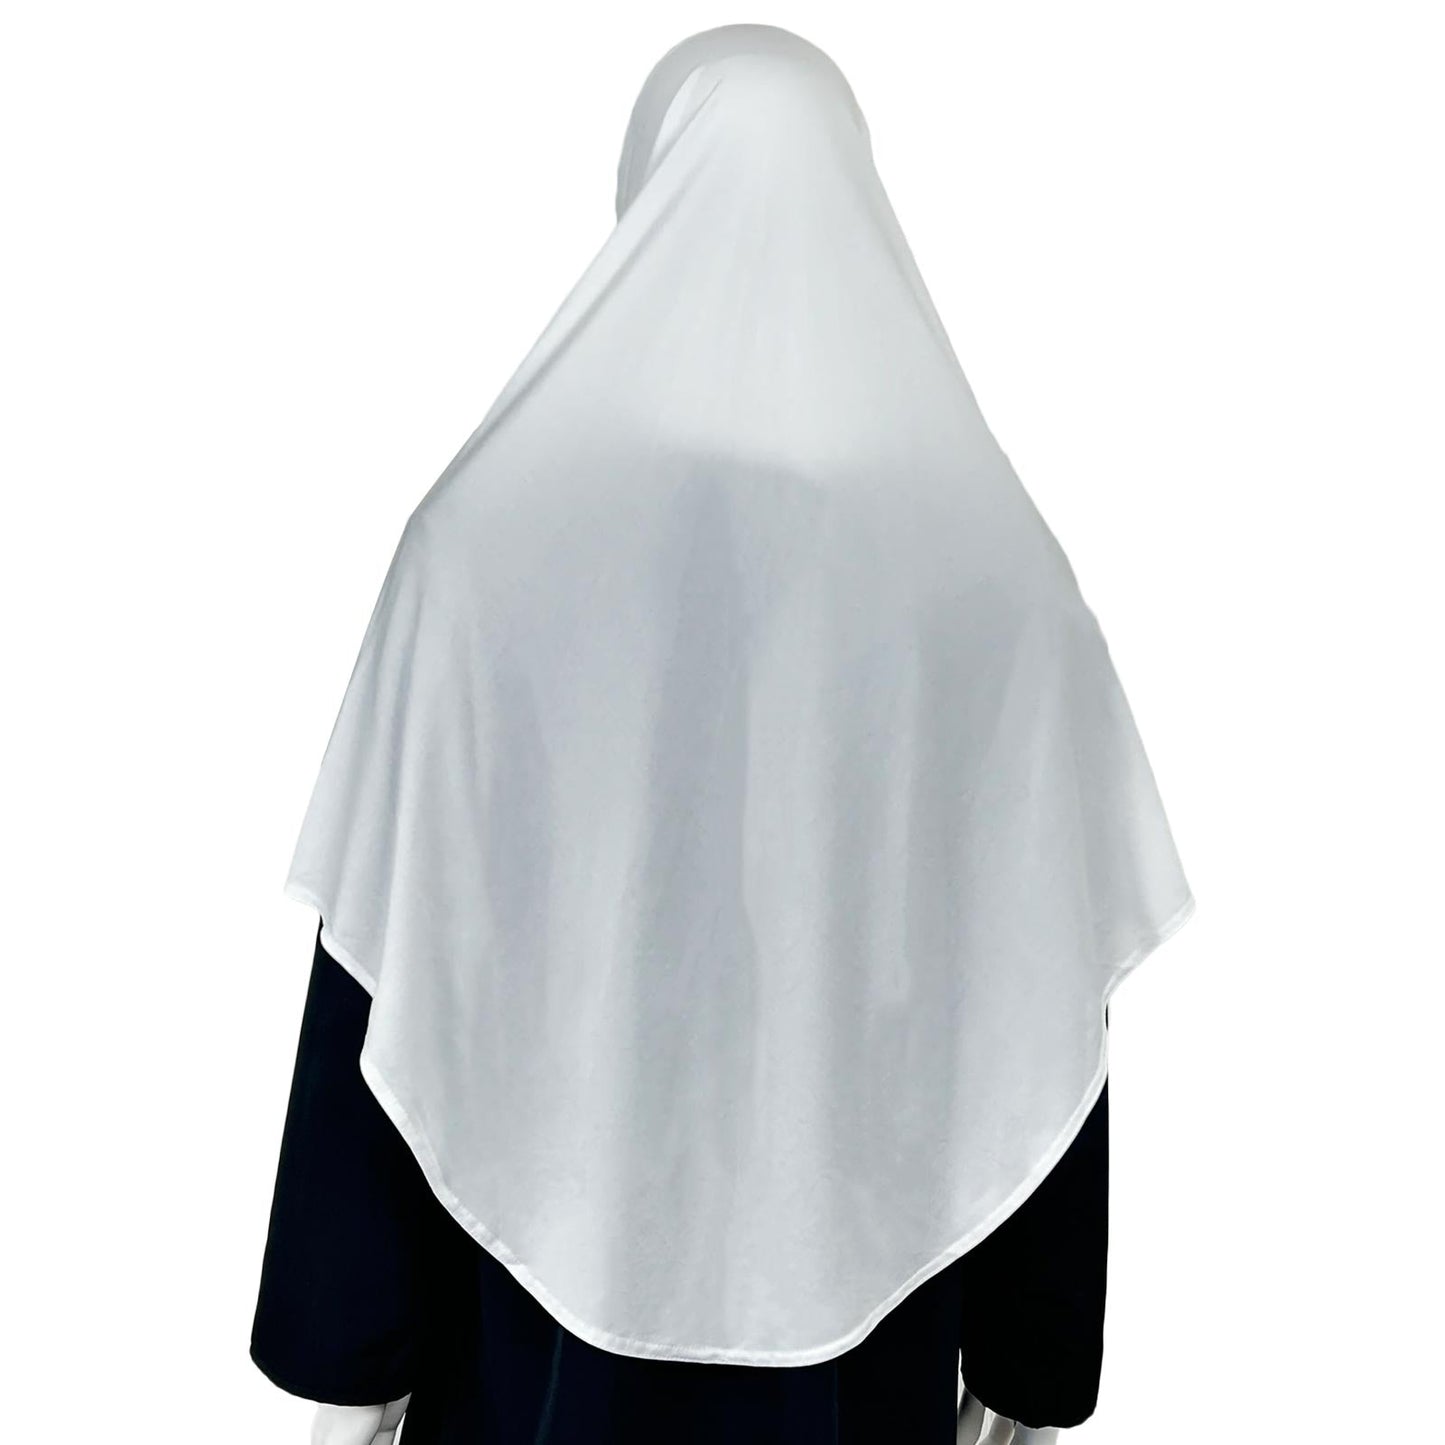 pull-on-instant-hijab-white-full-coverage